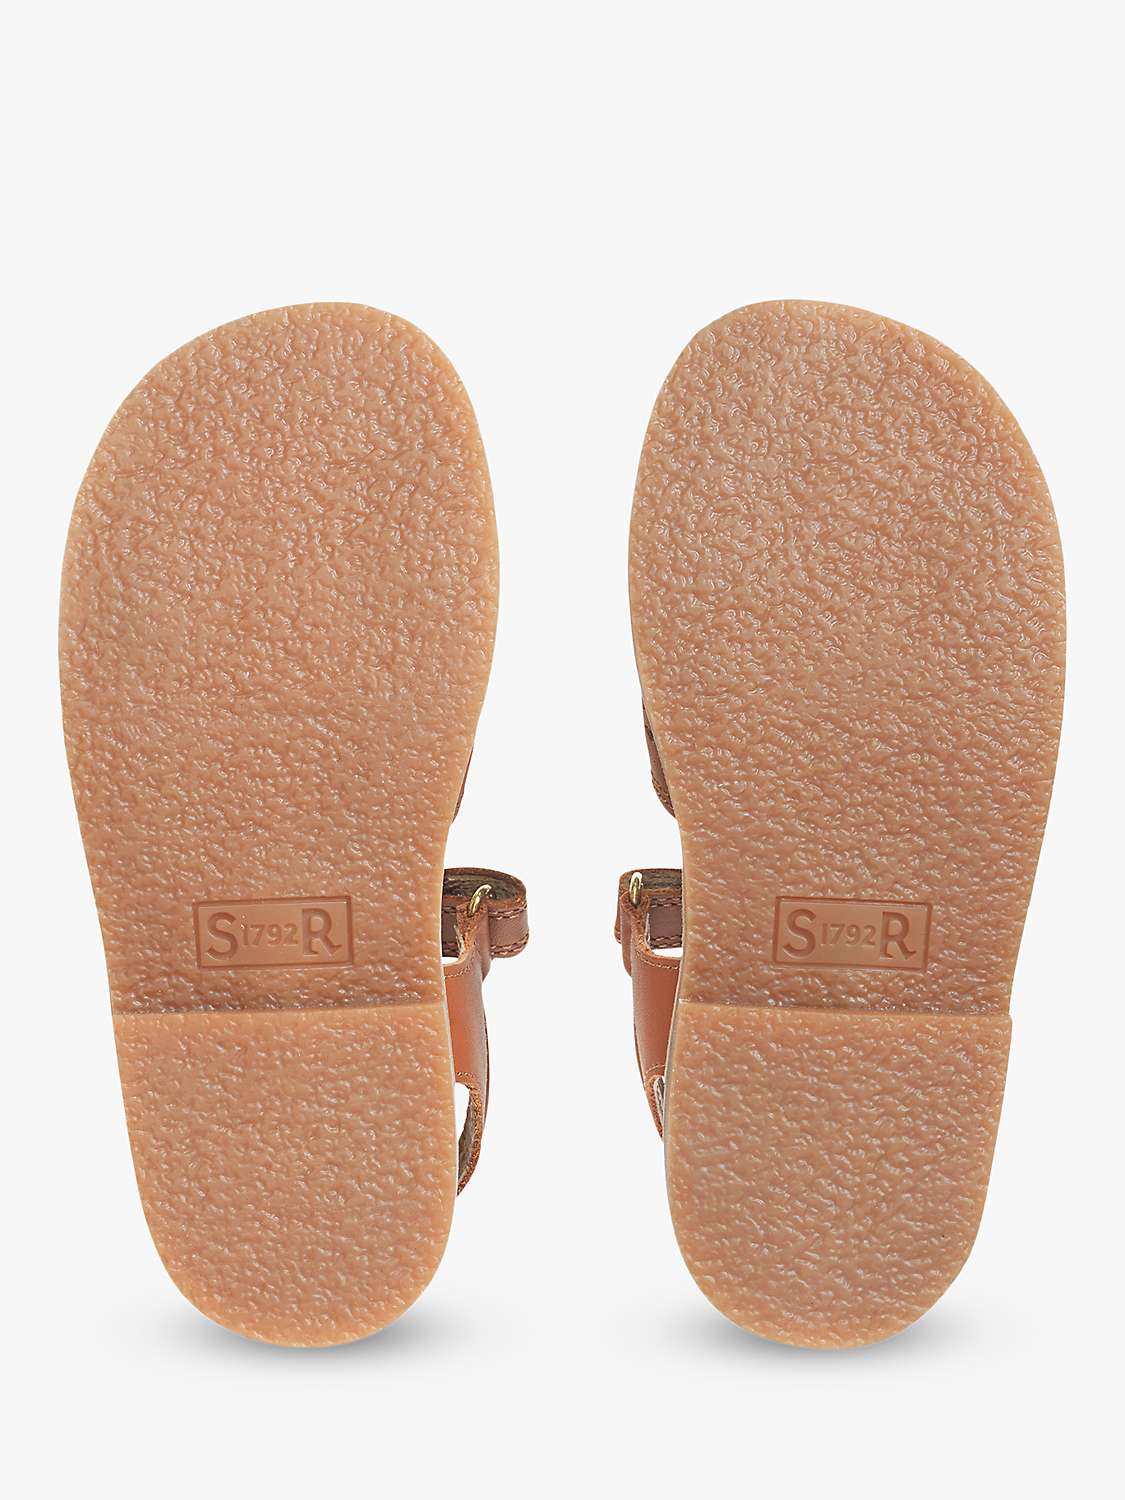 Buy Start-Rite Kids' Holiday Leather Sandals, Tan Online at johnlewis.com